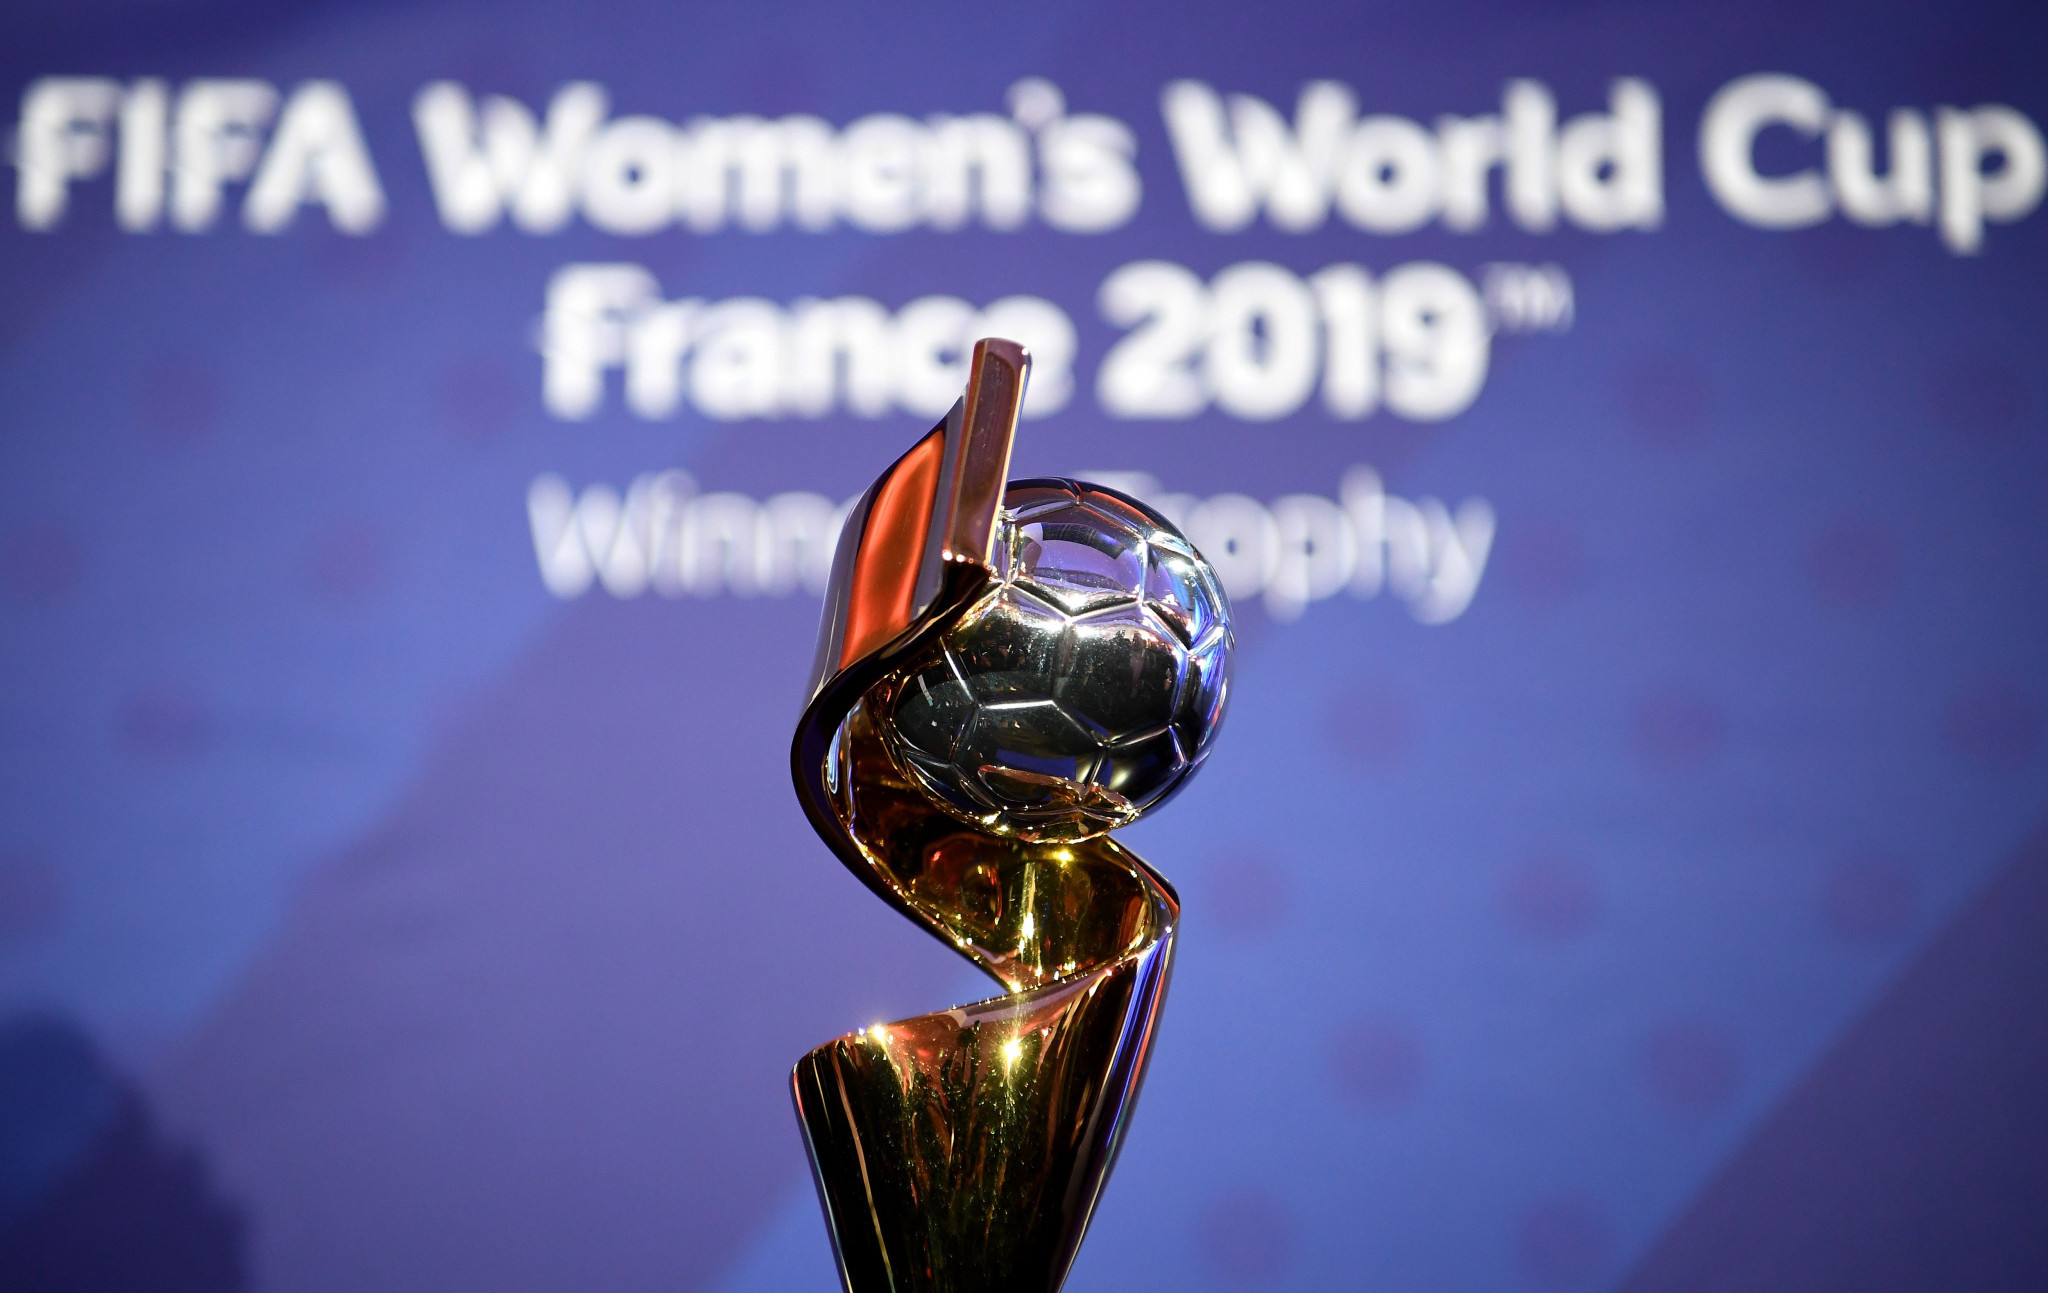 Equatorial Guinea banned from 2019 FIFA Women's World Cup for fielding ineligible players